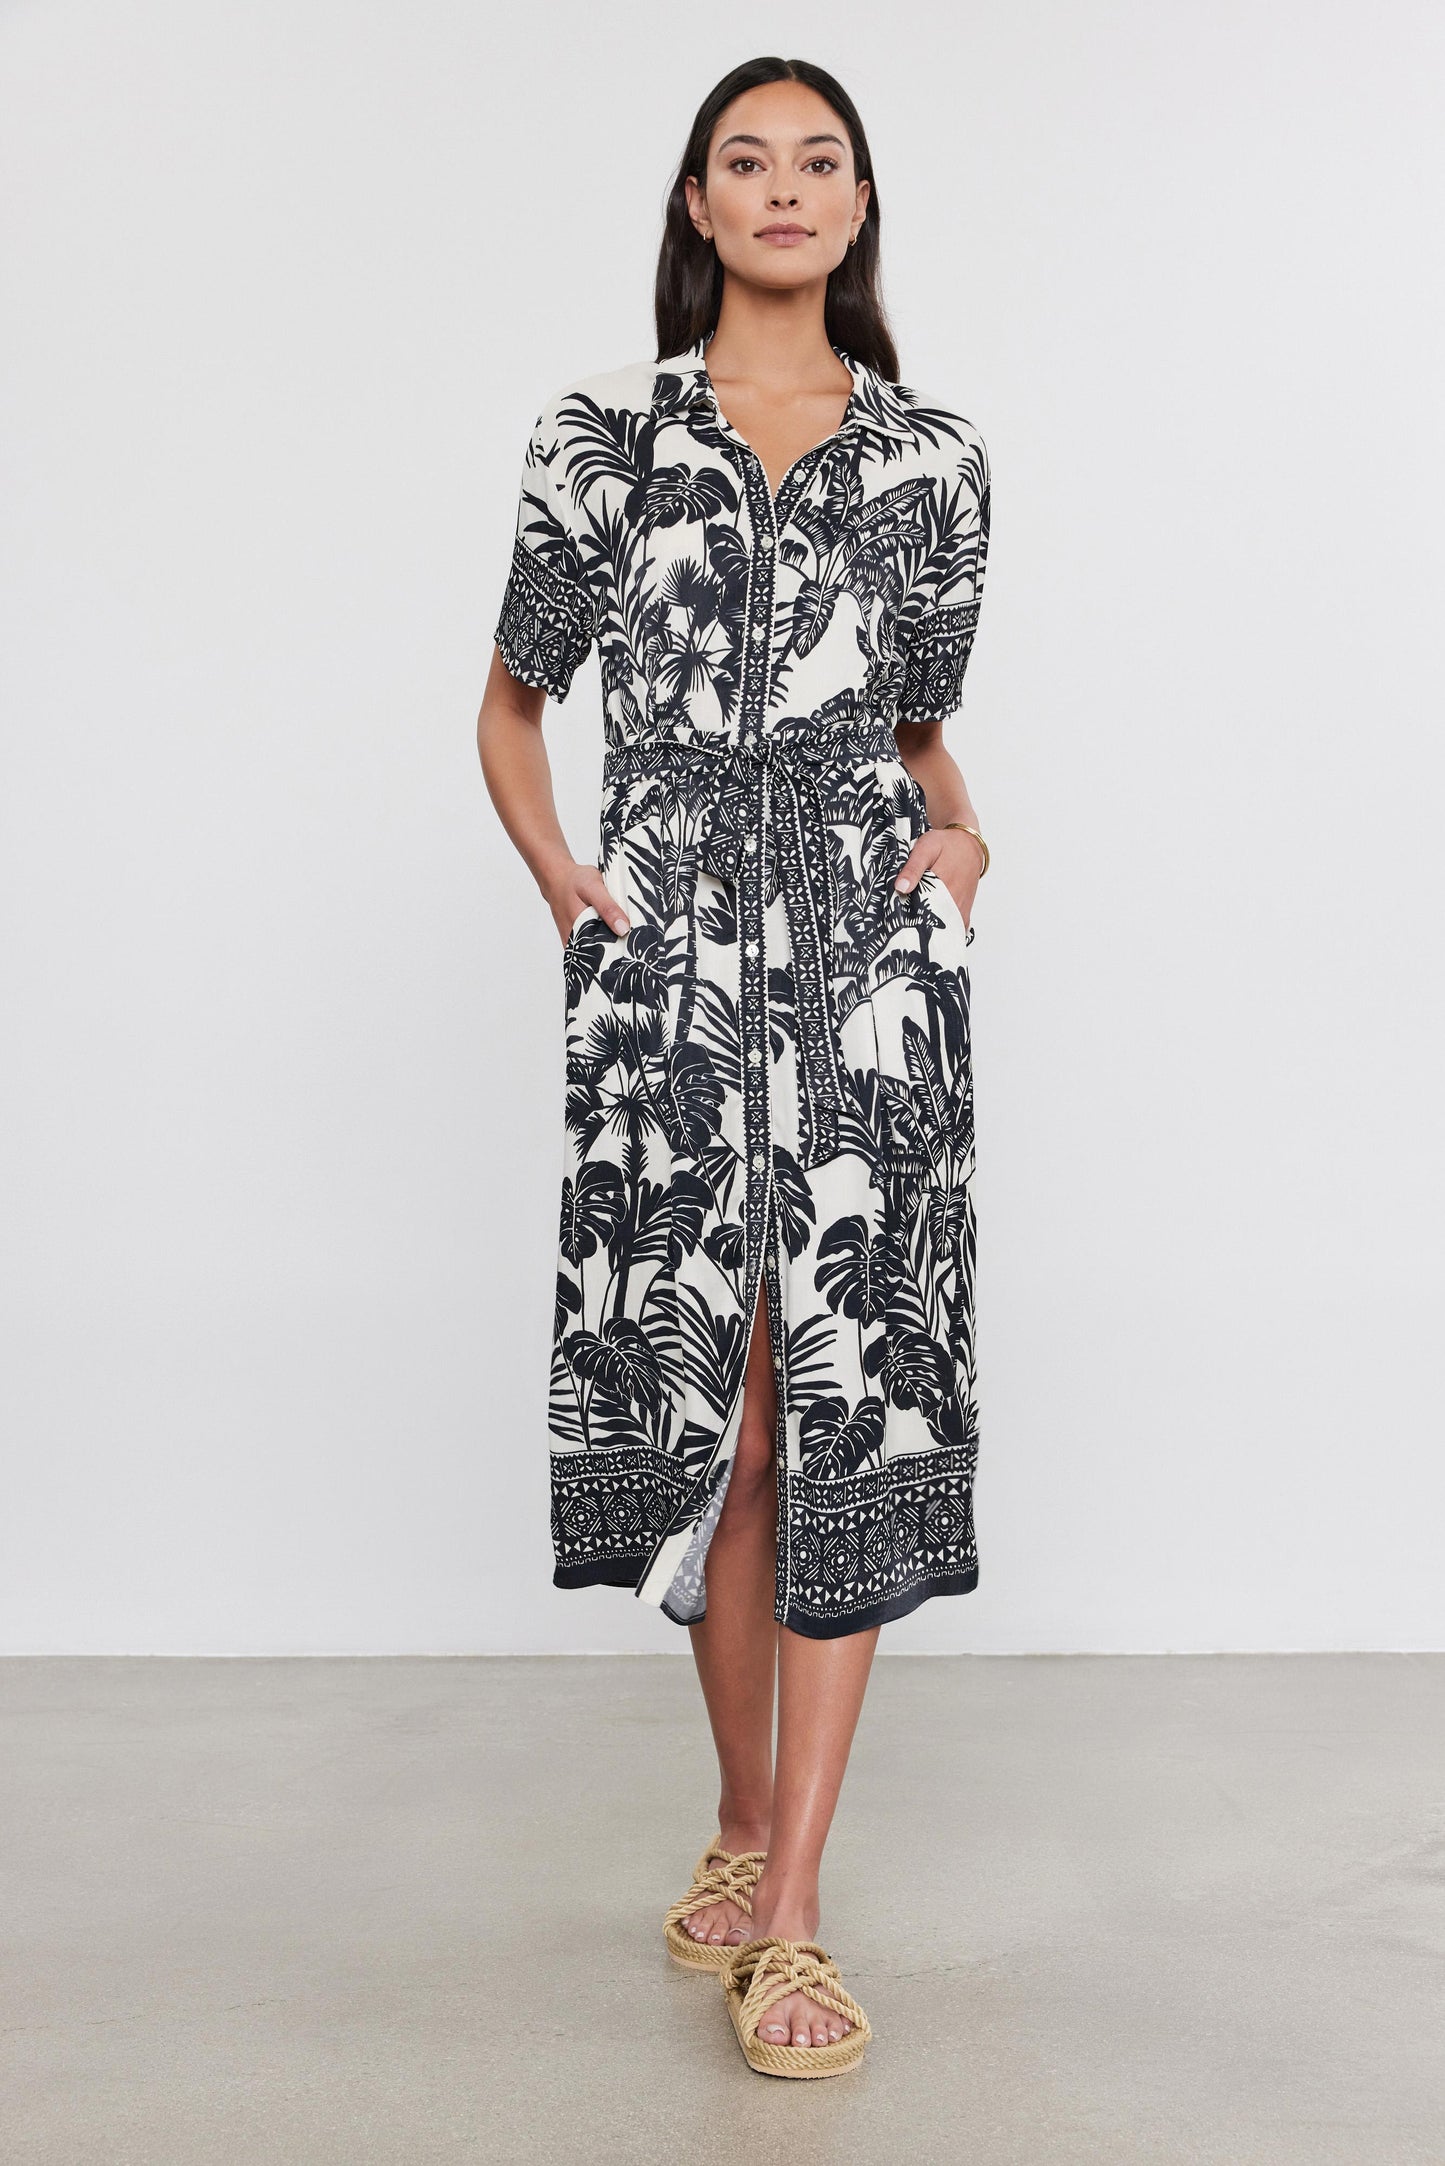 A woman stands in a studio wearing a black and white palm print Freya Dress by Velvet by Graham & Spencer with a front zipper and sandals.-36910269792449